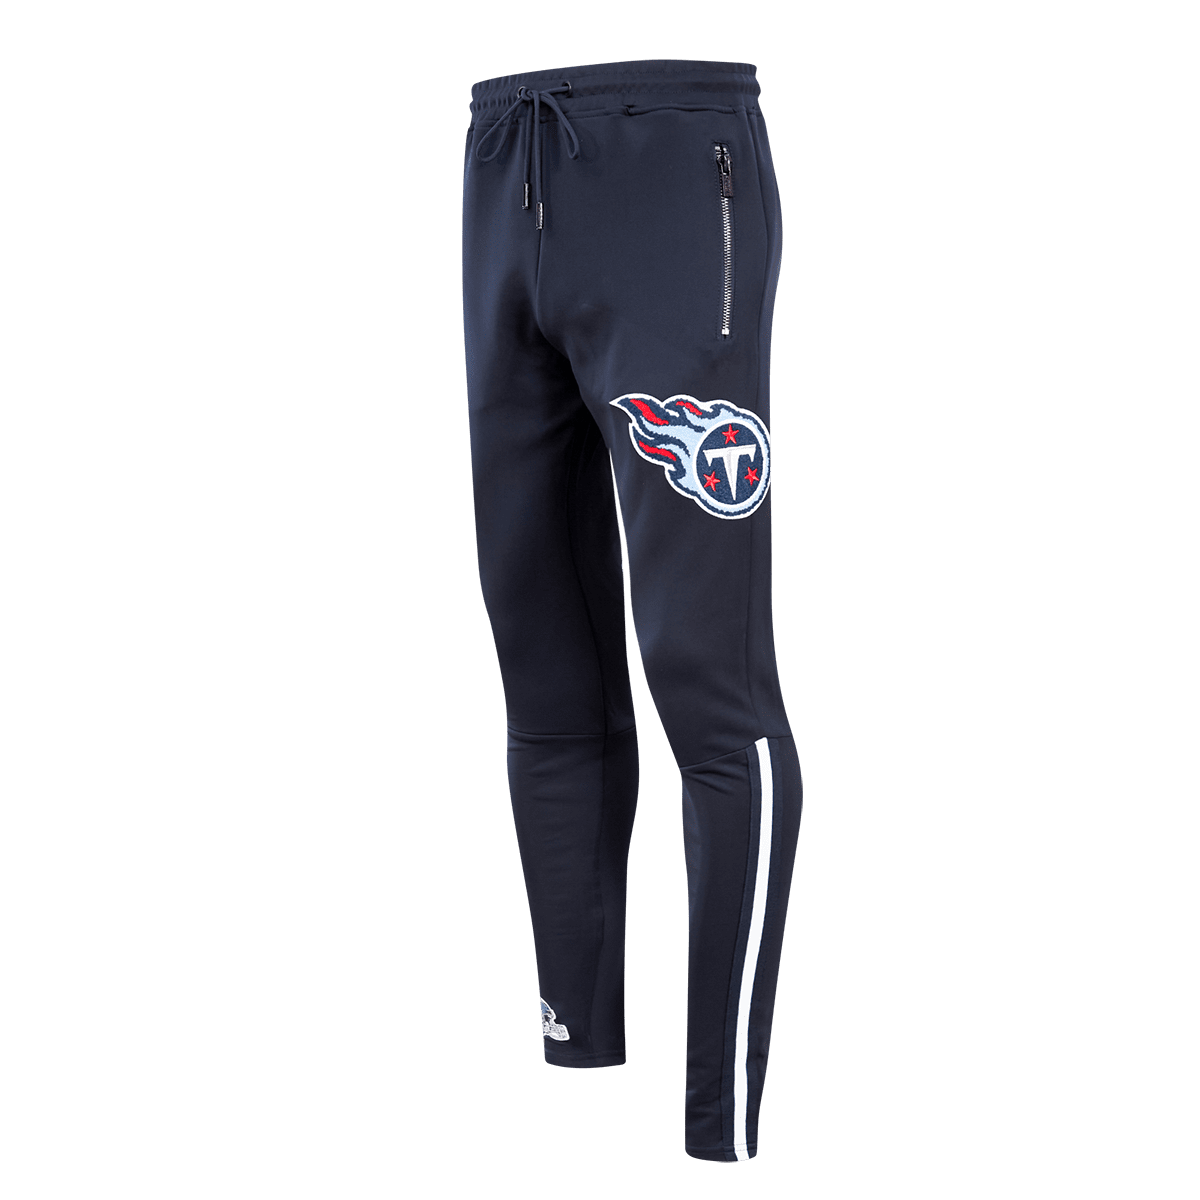 TENNESSEE TITANS CLASSIC DK TRACK PANT (MIDNIGHT NAVY)